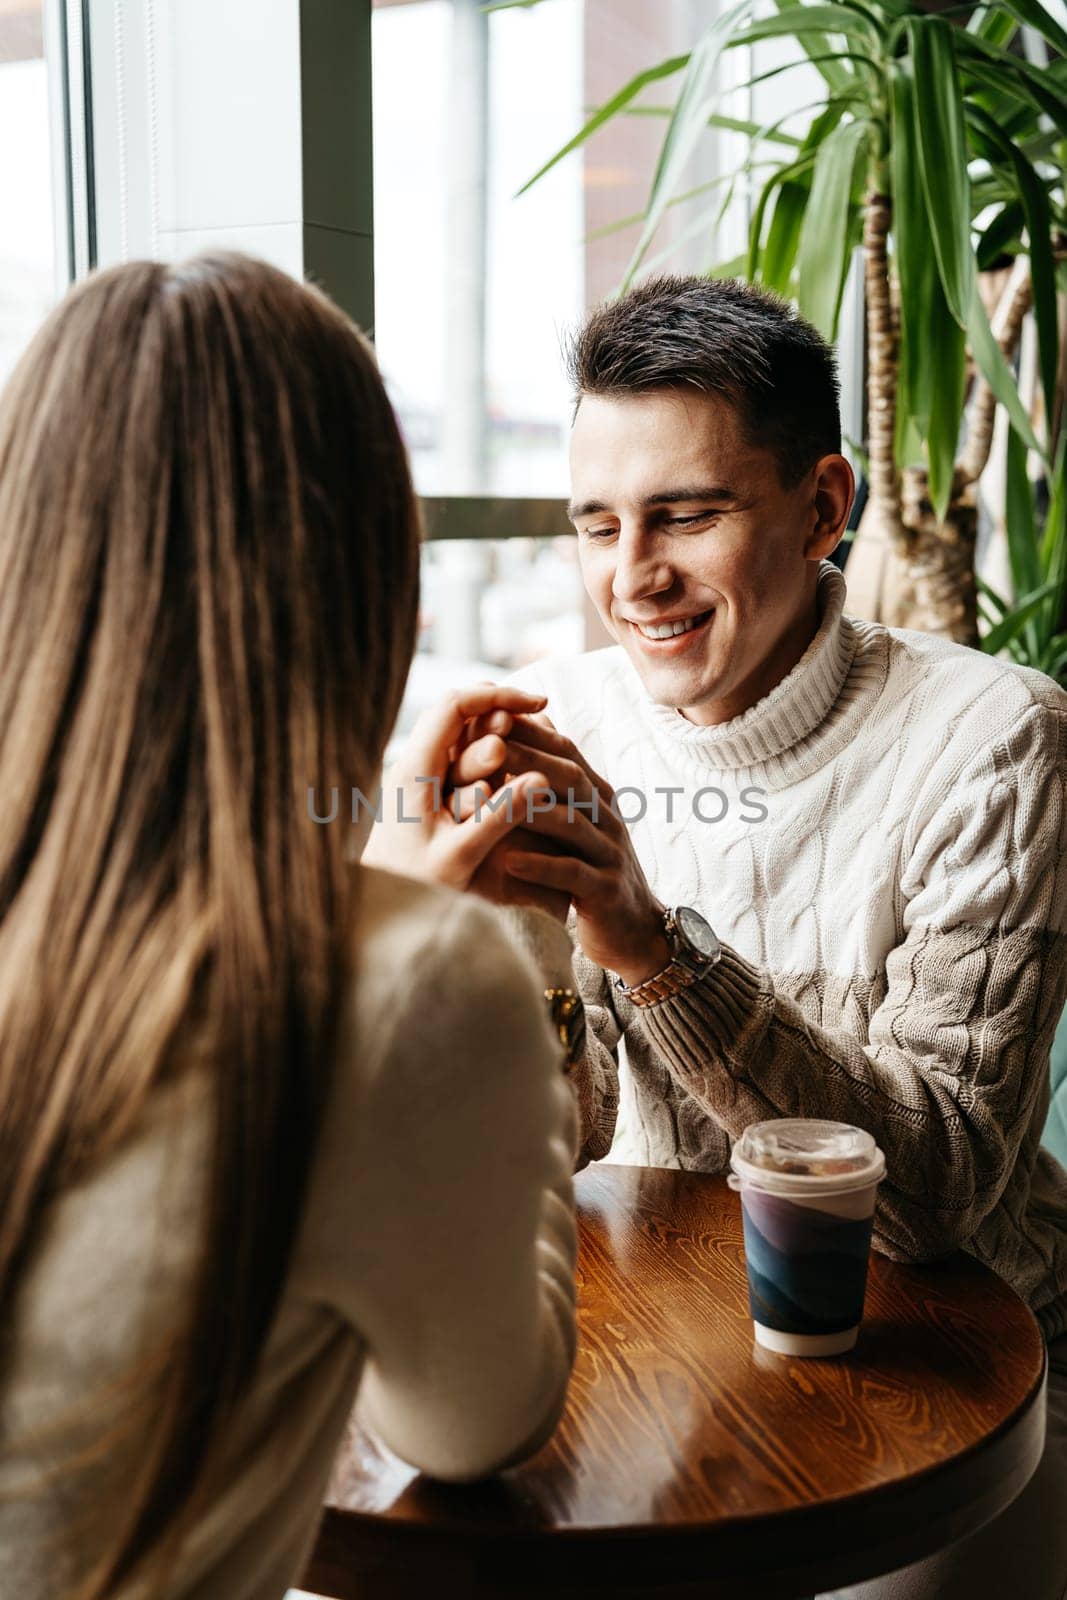 A cheerful man in a knit sweater is enjoying a chat with a woman at a wooden table in a quaint cafe. A drink in a disposable cup suggests a relaxed, informal setting, and natural light spilling from the window adds warmth to the scene. Their engagement in conversation captures a moment of genuine connection and companionship.